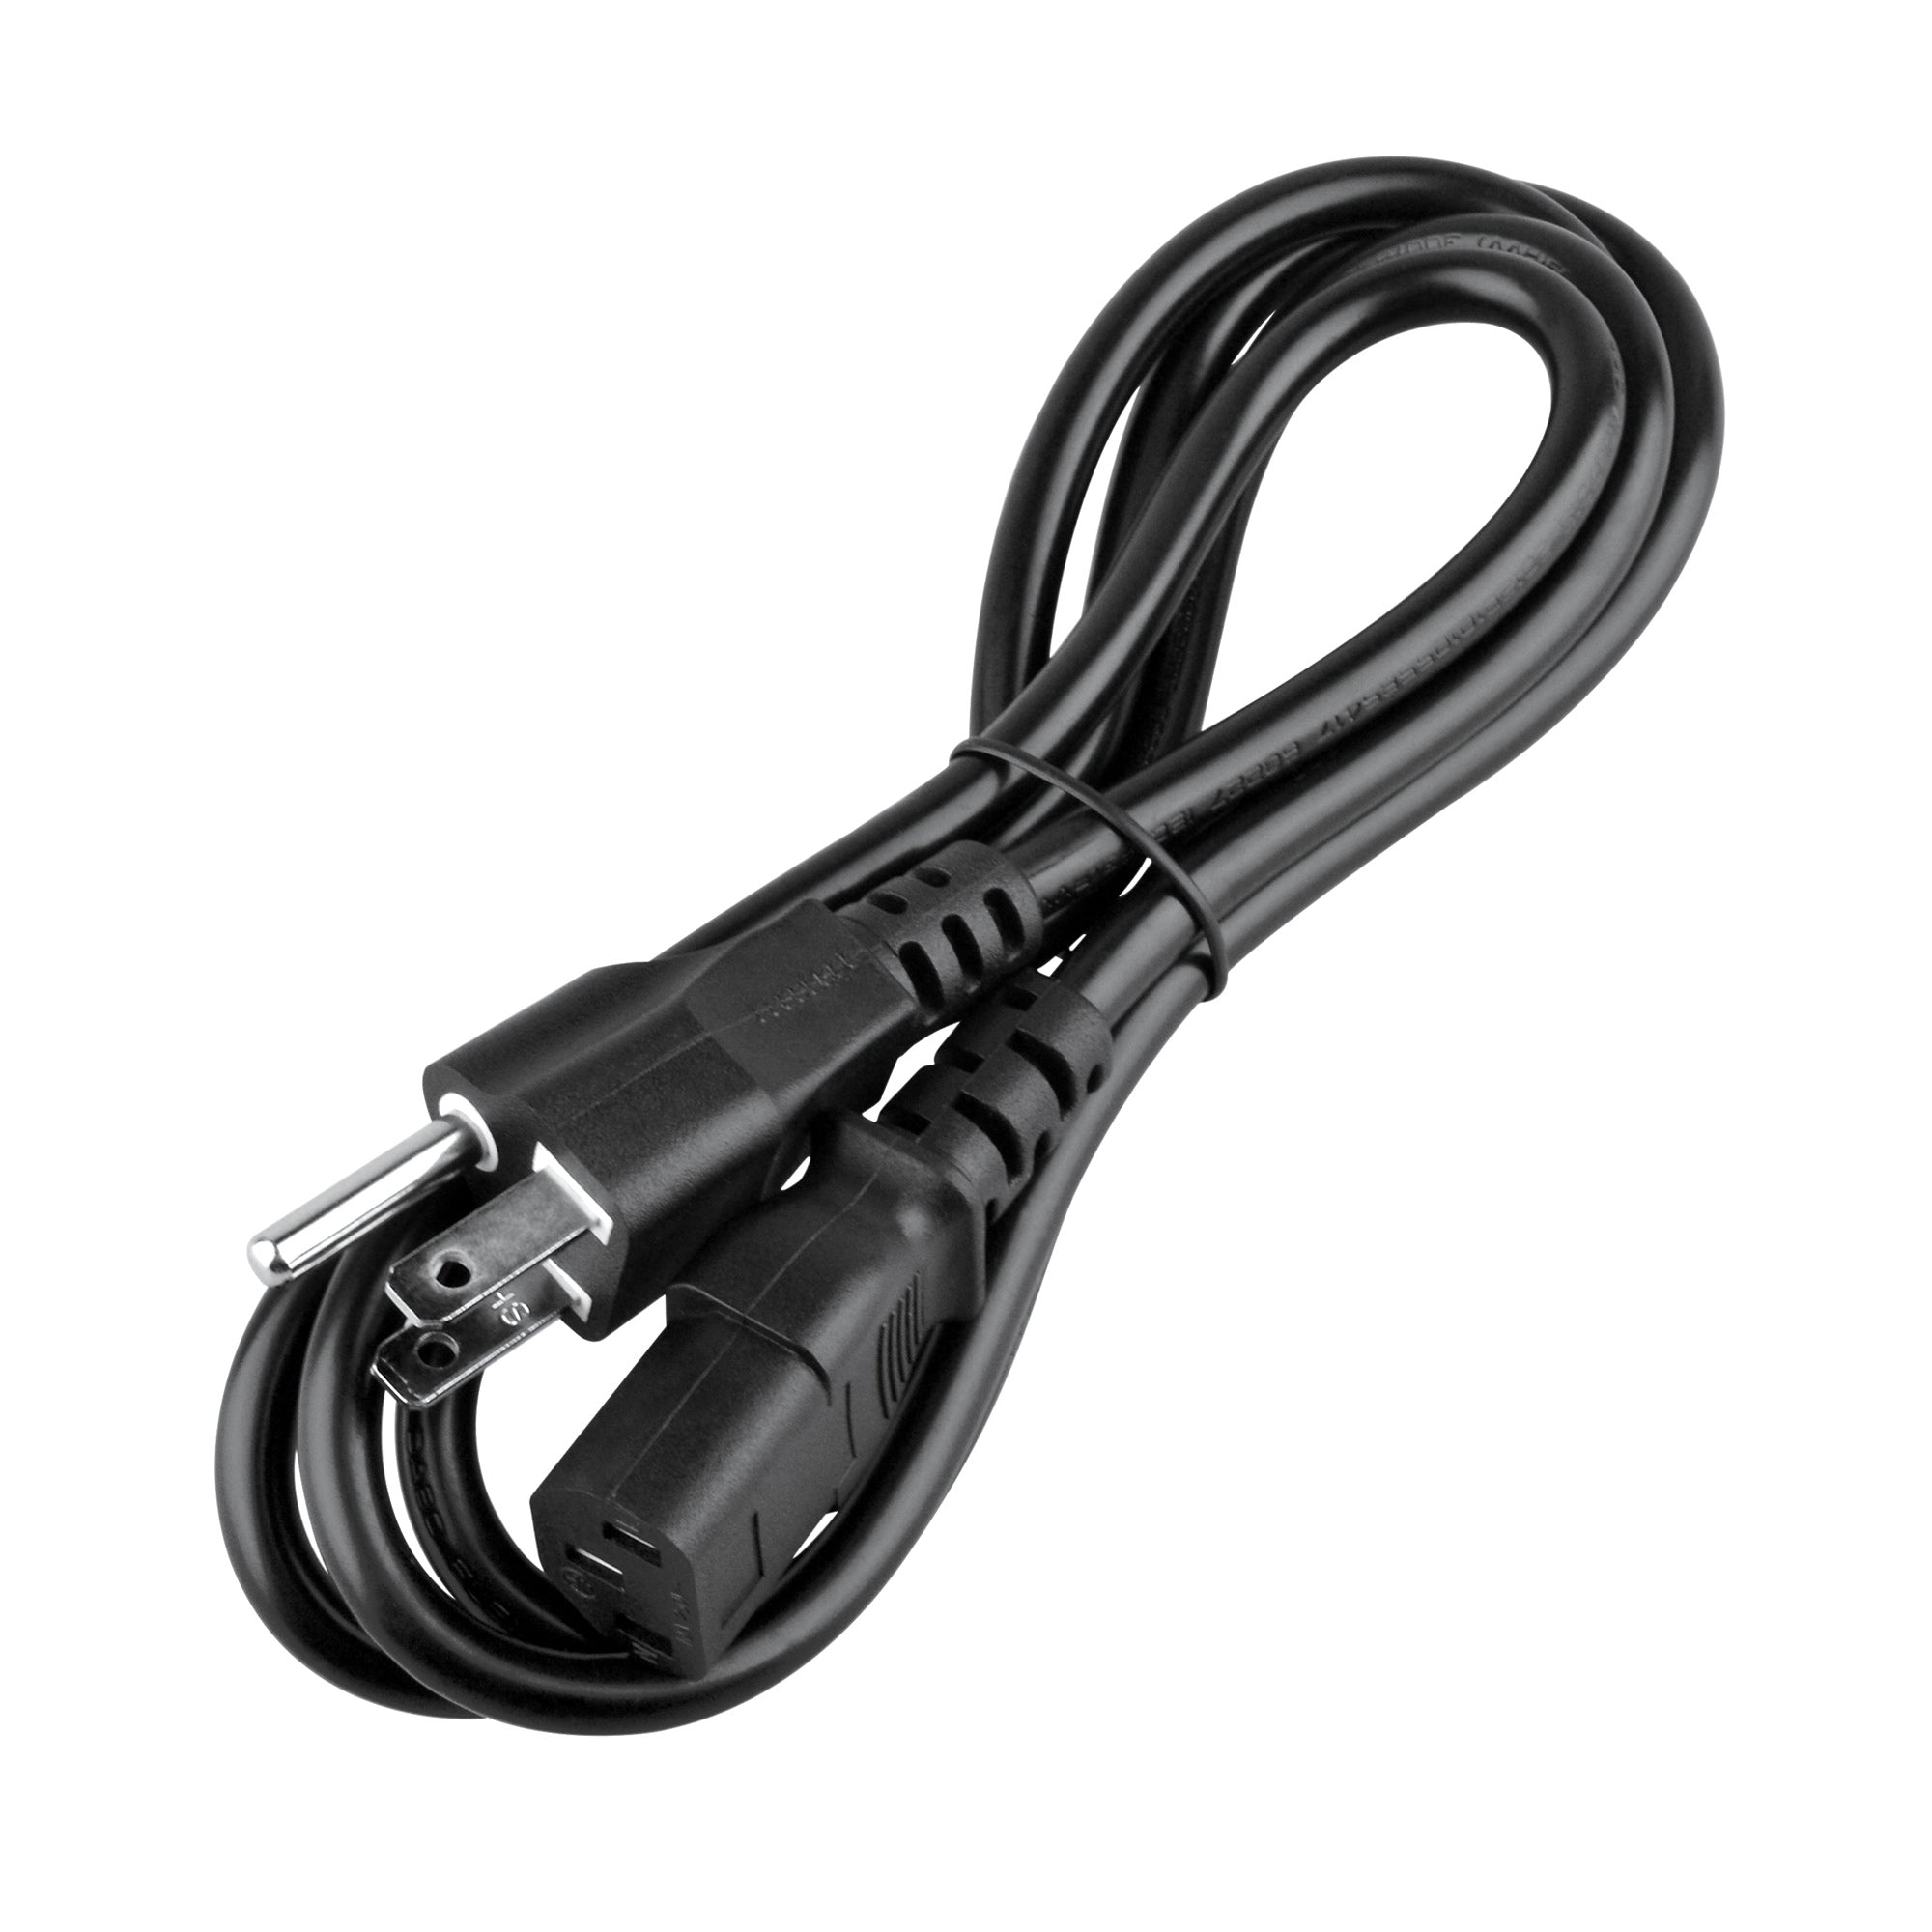 AbleGrid AC Power Cord Cable Lead Compatible with Vox VT15 25watt Guitar Amp